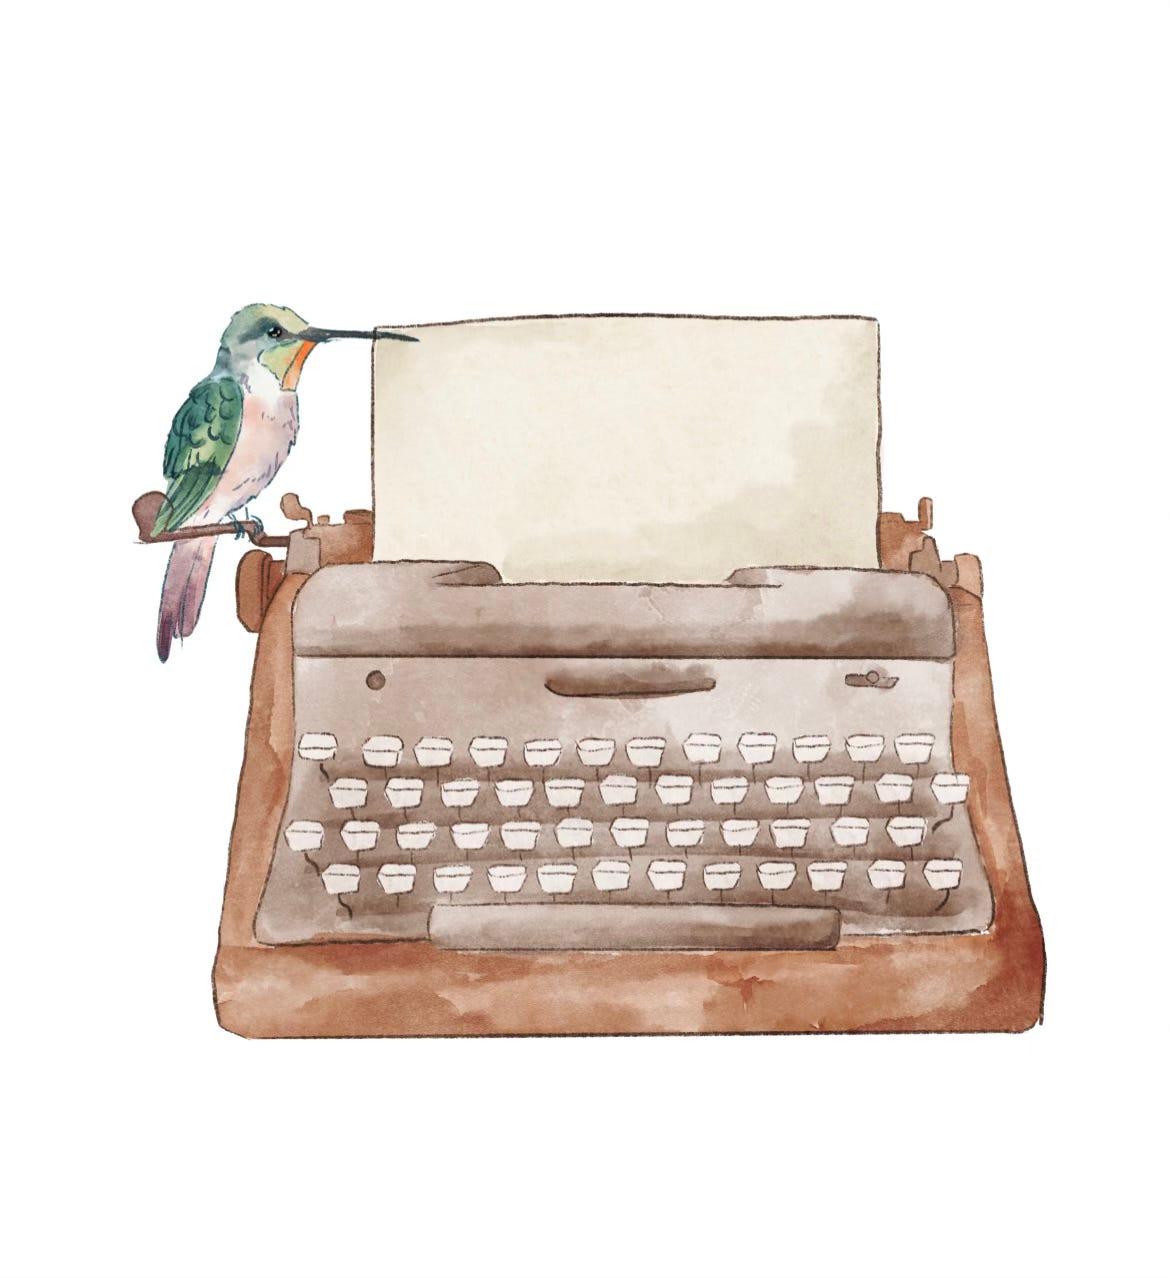 watercolor of a hummingbird sitting on a typewriter